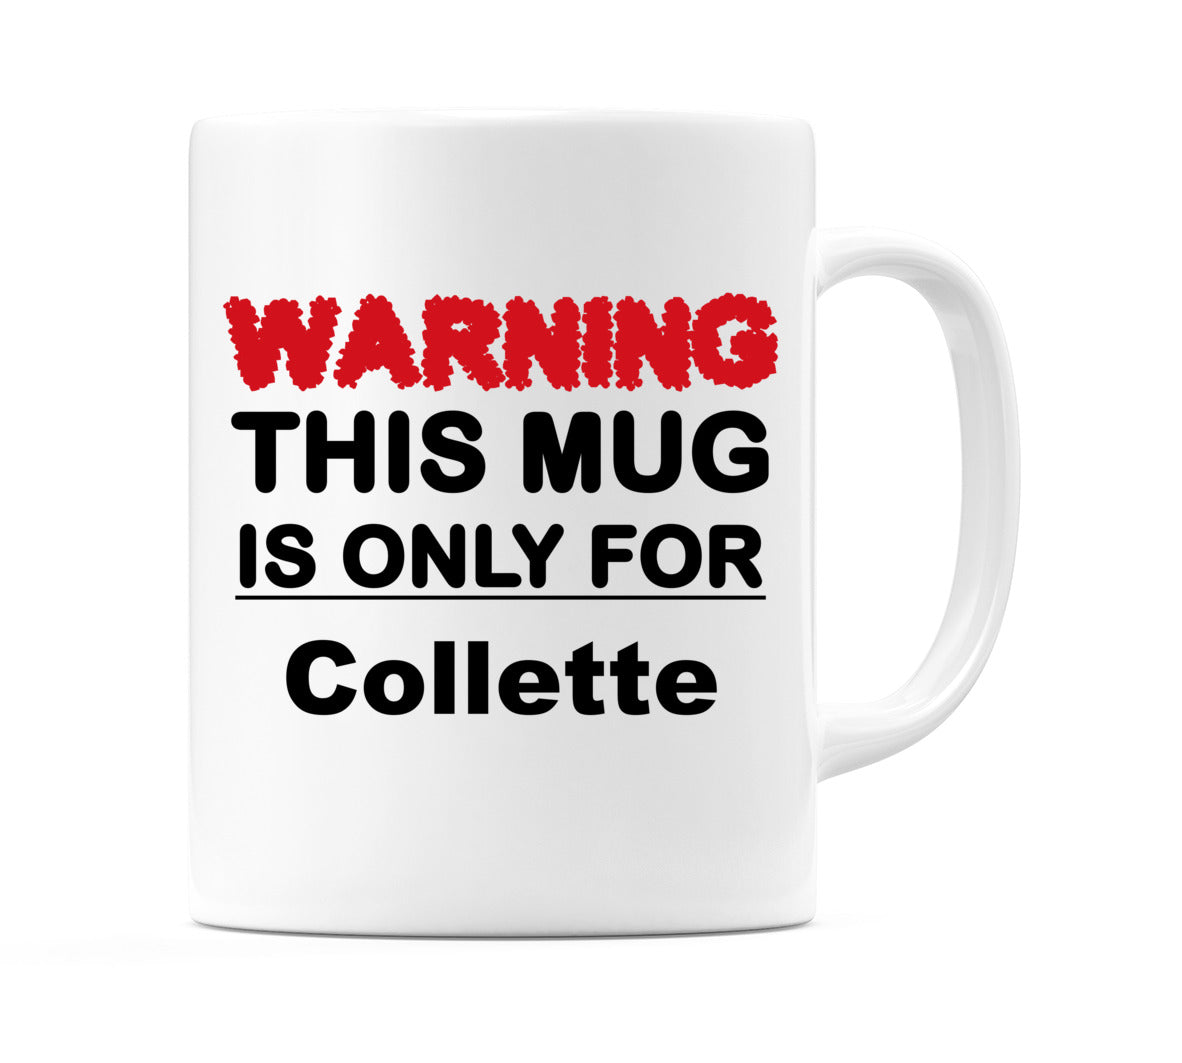 Warning This Mug is ONLY for Collette Mug